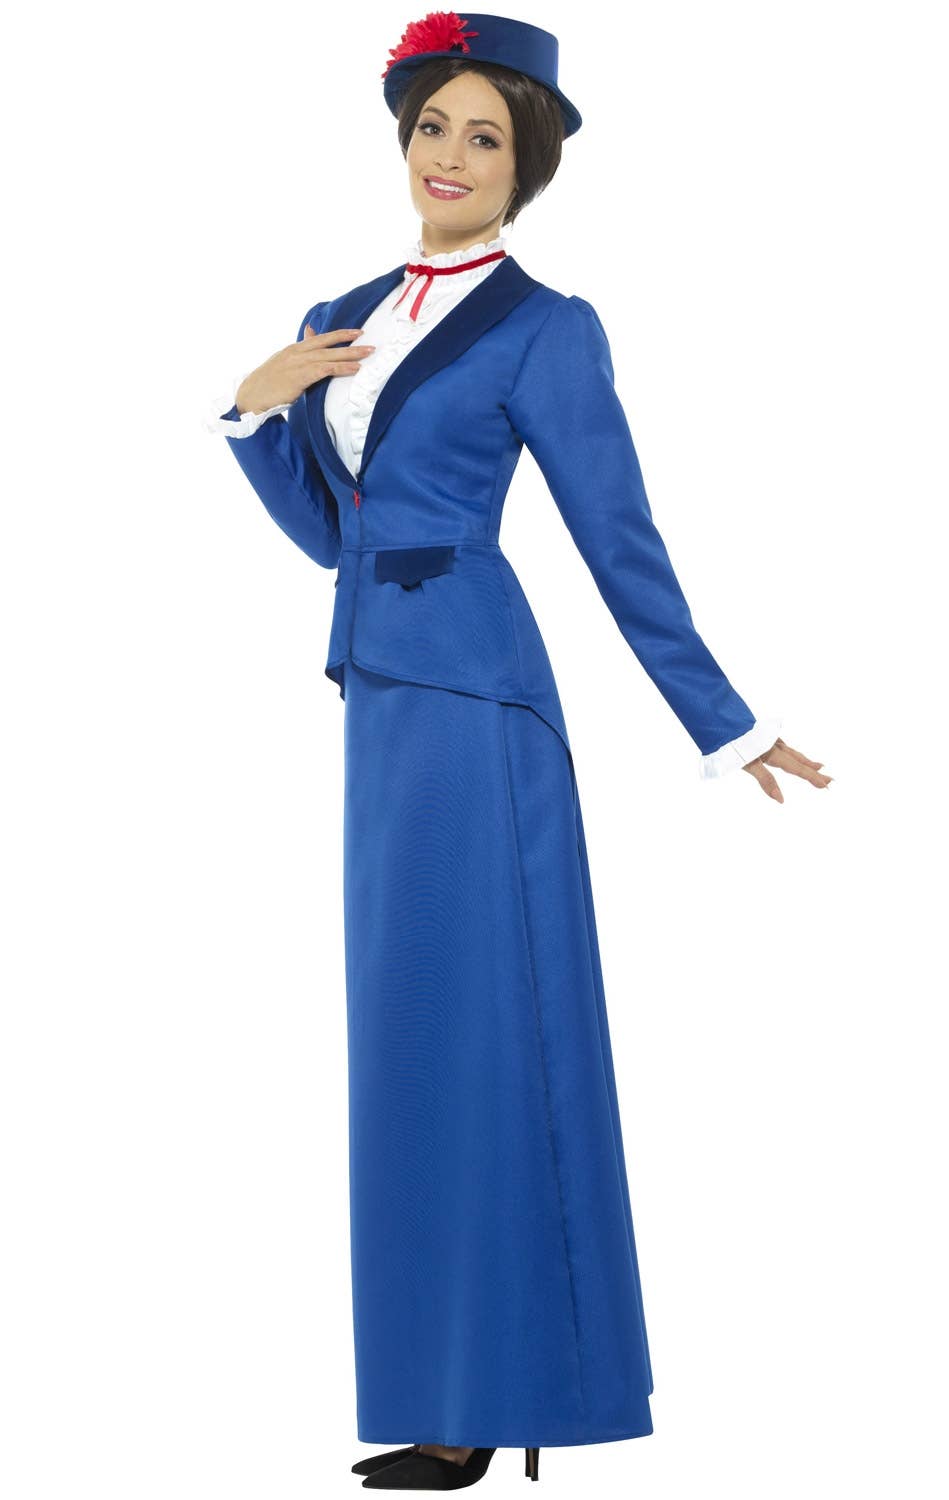 Women's Blue Victorian Nanny Mary Poppins Costume Side View